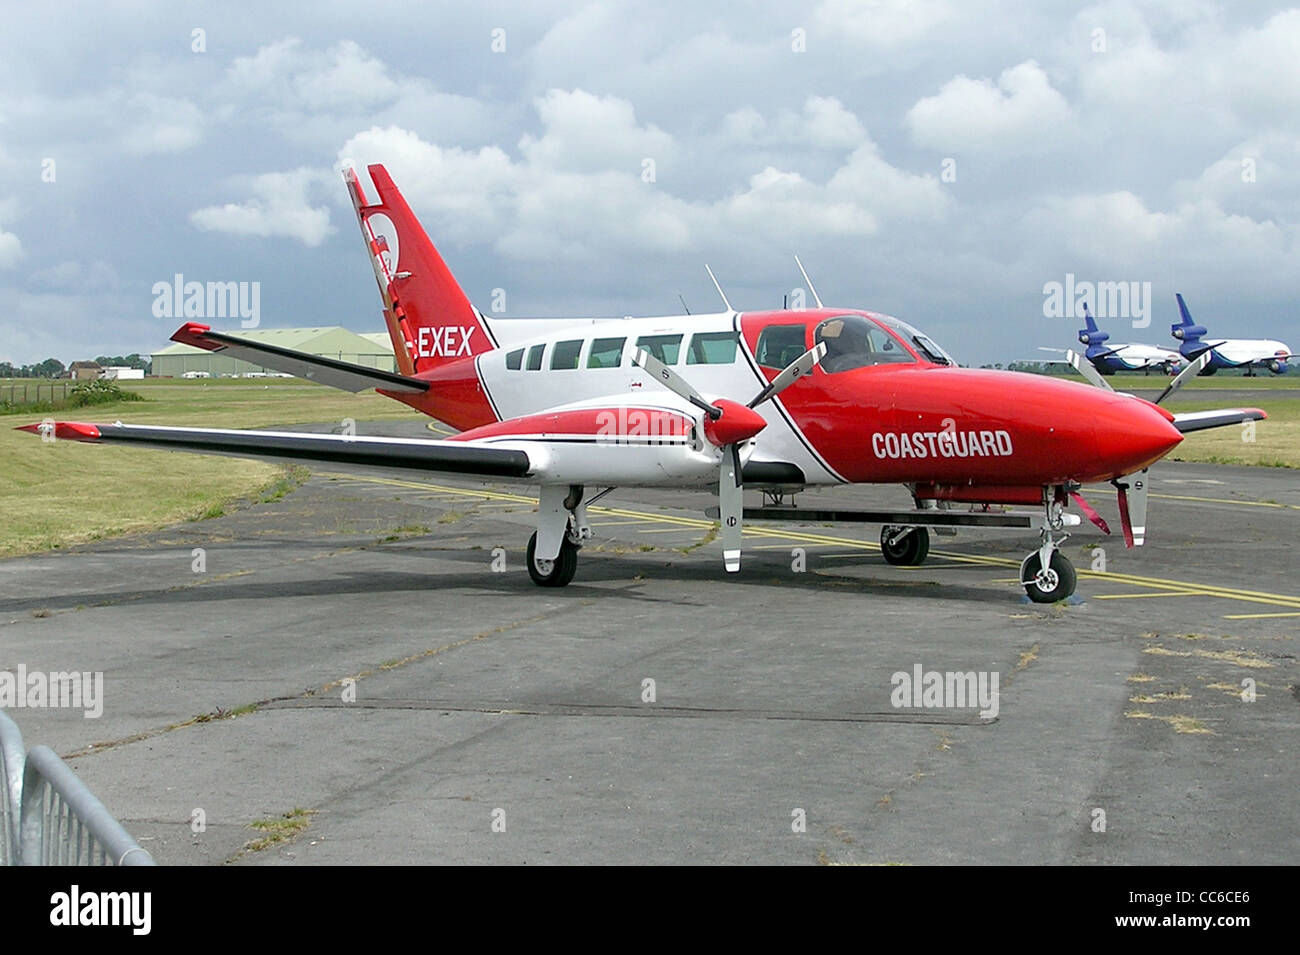 1977 Cessna 404 Titan II (G-EXEX) a Kemble airfield, Gloucestershire, Inghilterra. Foto Stock